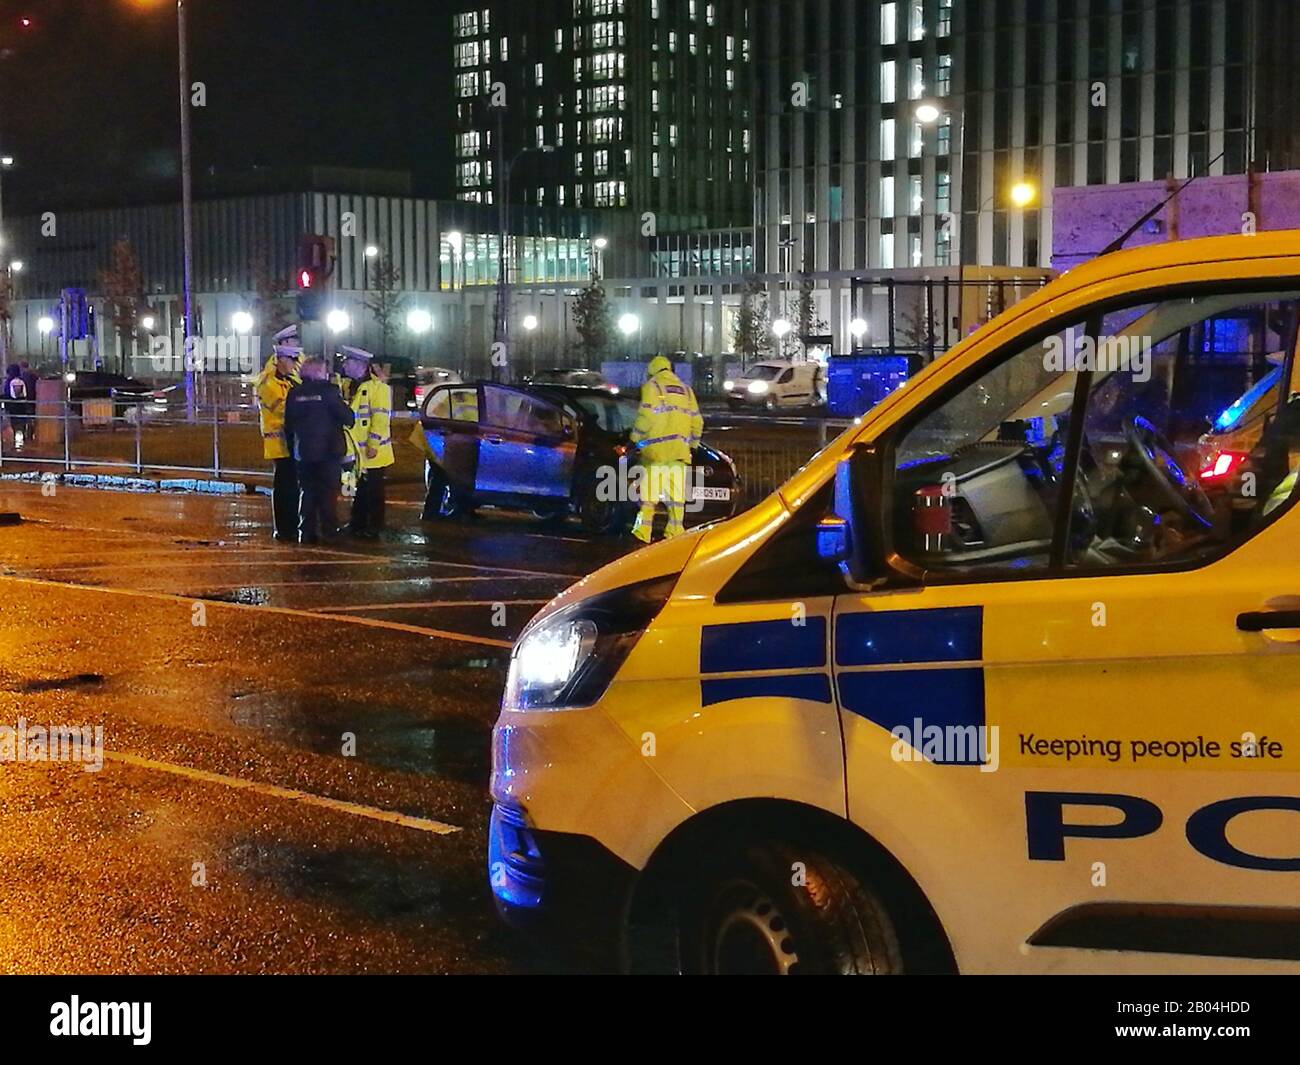 Glasgow, UK. 18th Feb, 2020. Police and ambulance services attending a road accident on Ballater street near Glasgow Health Club in Glasgow. Access from Crown street closed. Credit: Alamy News/Pawel Pietraszewski Credit: Pawel Pietraszewski/Alamy Live News Stock Photo